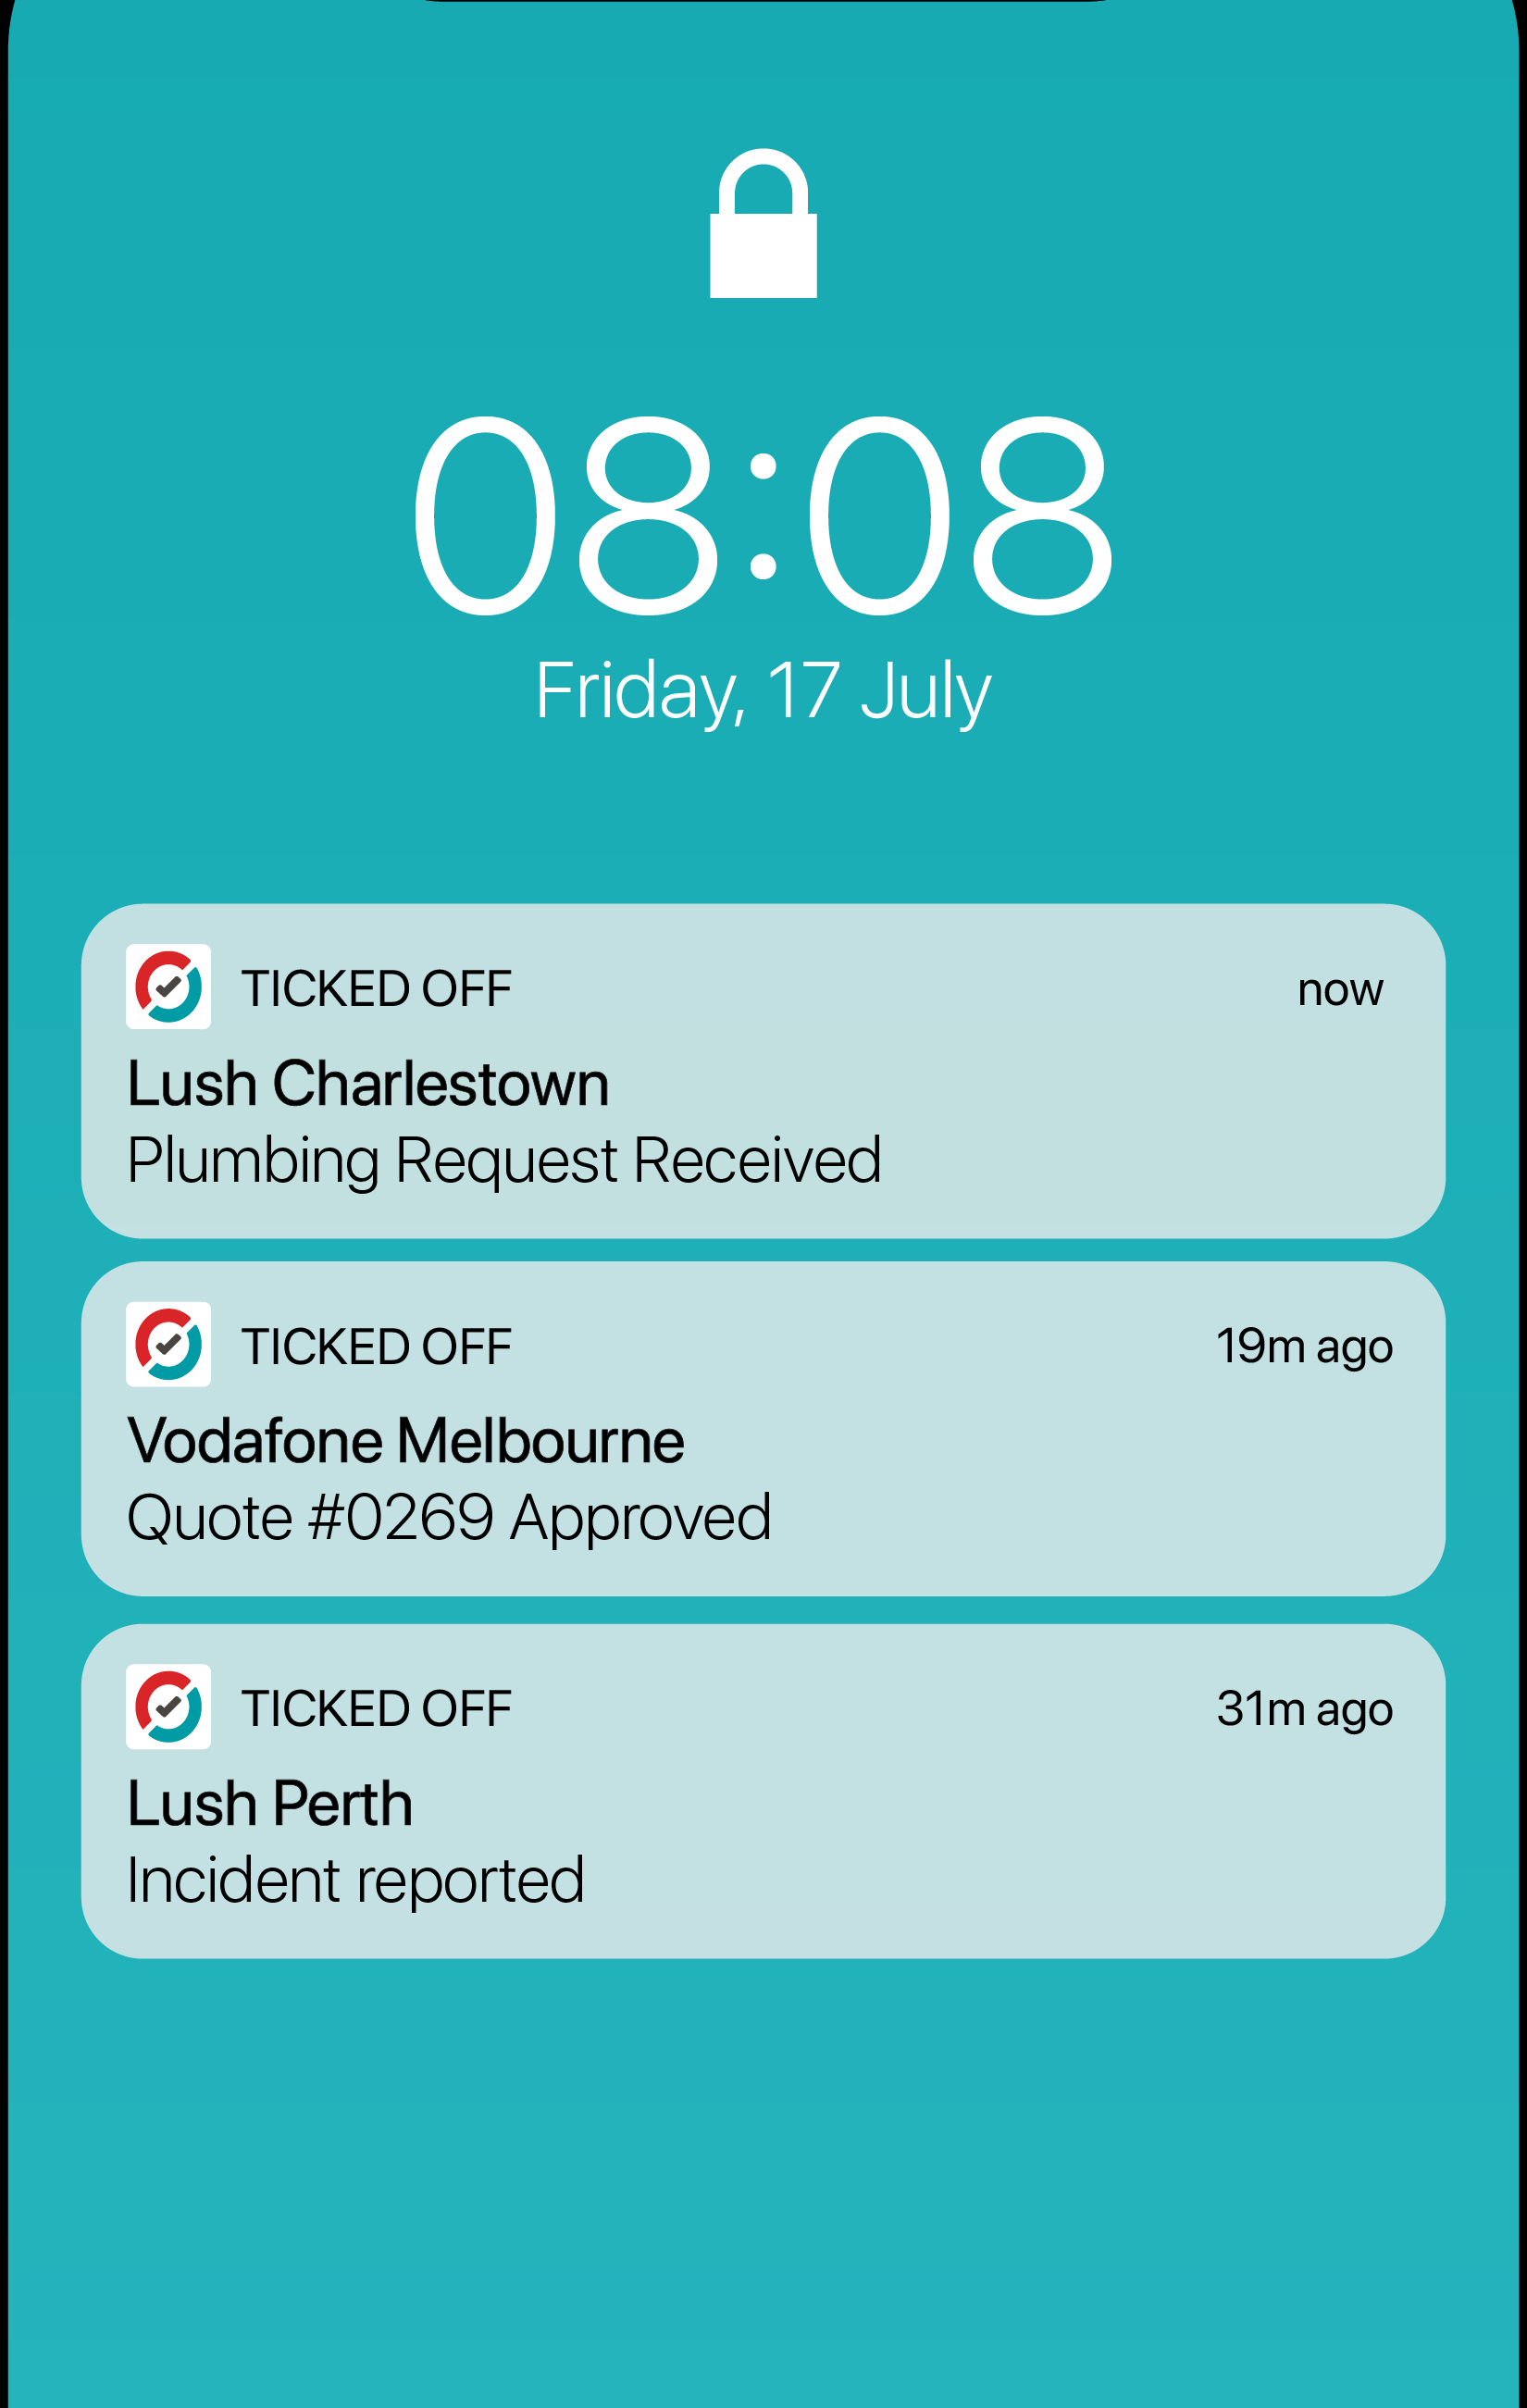 Ticked Off live notifications